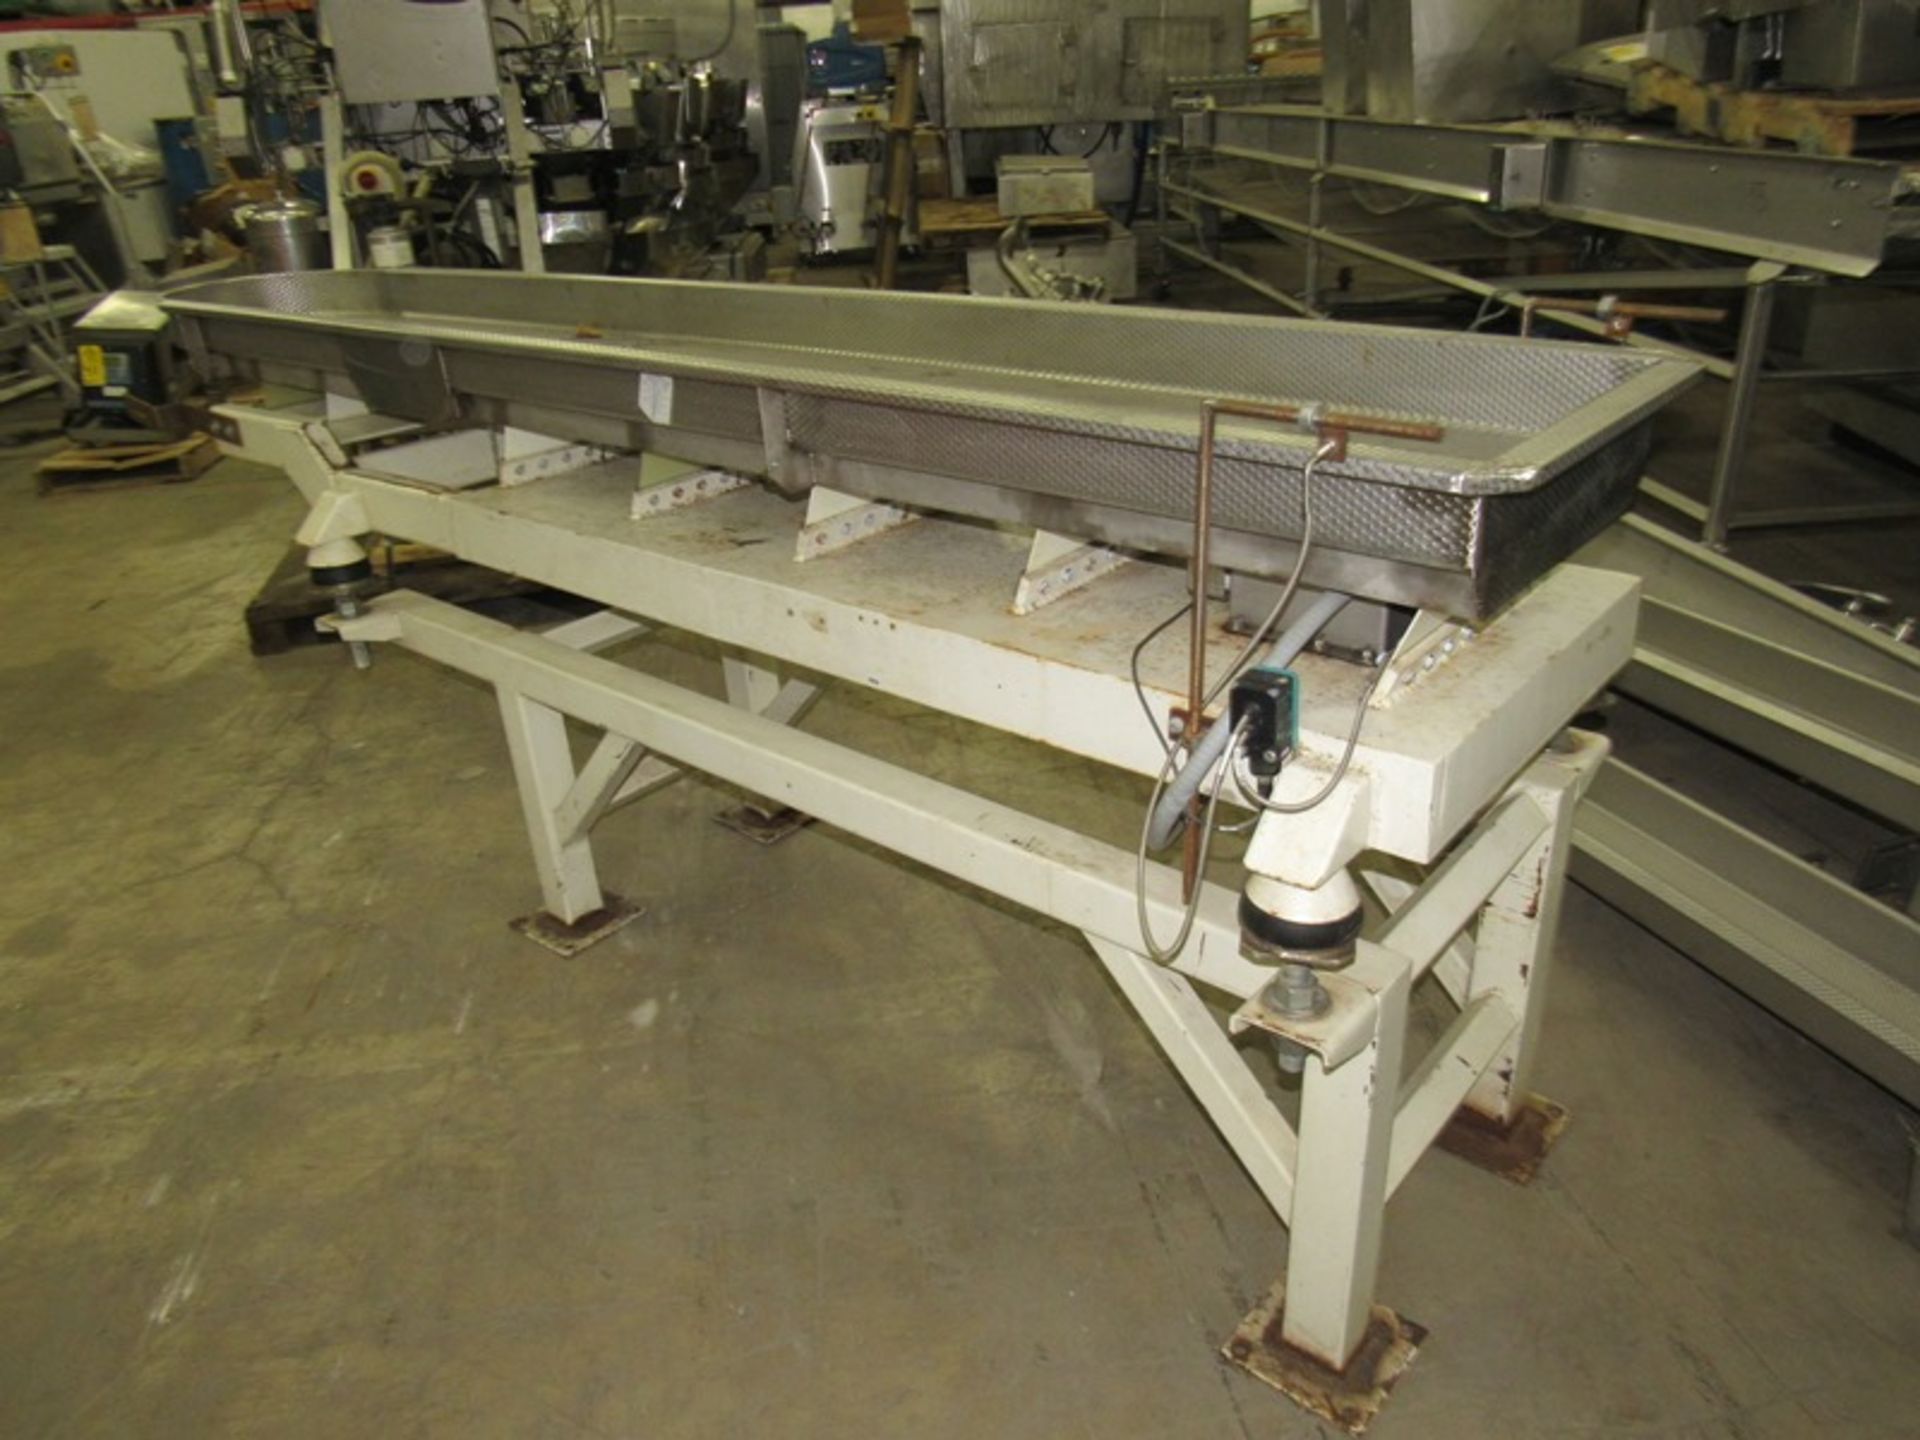 Smalley Mdl. EMC2t Vibratory Conveyor, dimpled stainless steel tray, 18" W X 115" L X 4" D, 9"